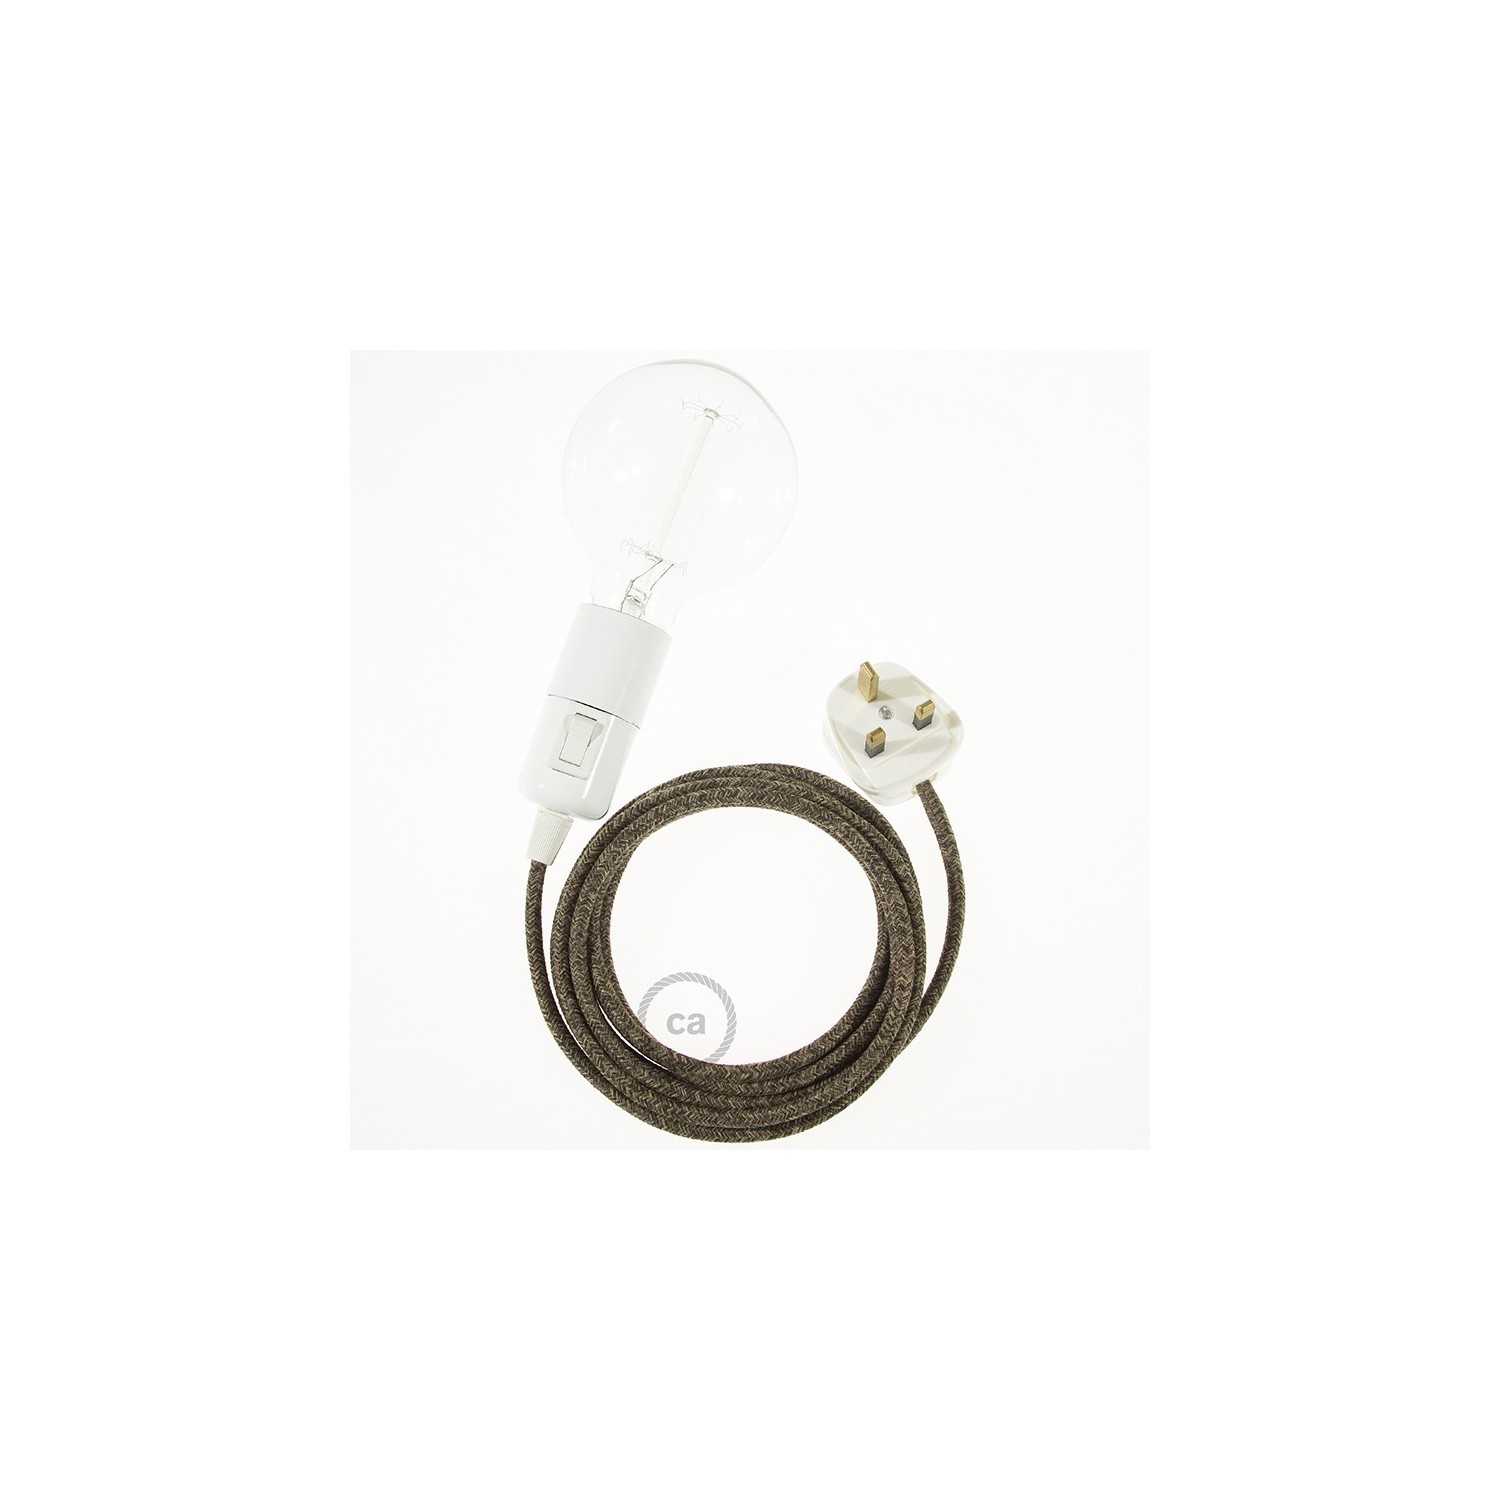 Create your RN04 Brown Natural Linen Snake and bring the light wherever you want.